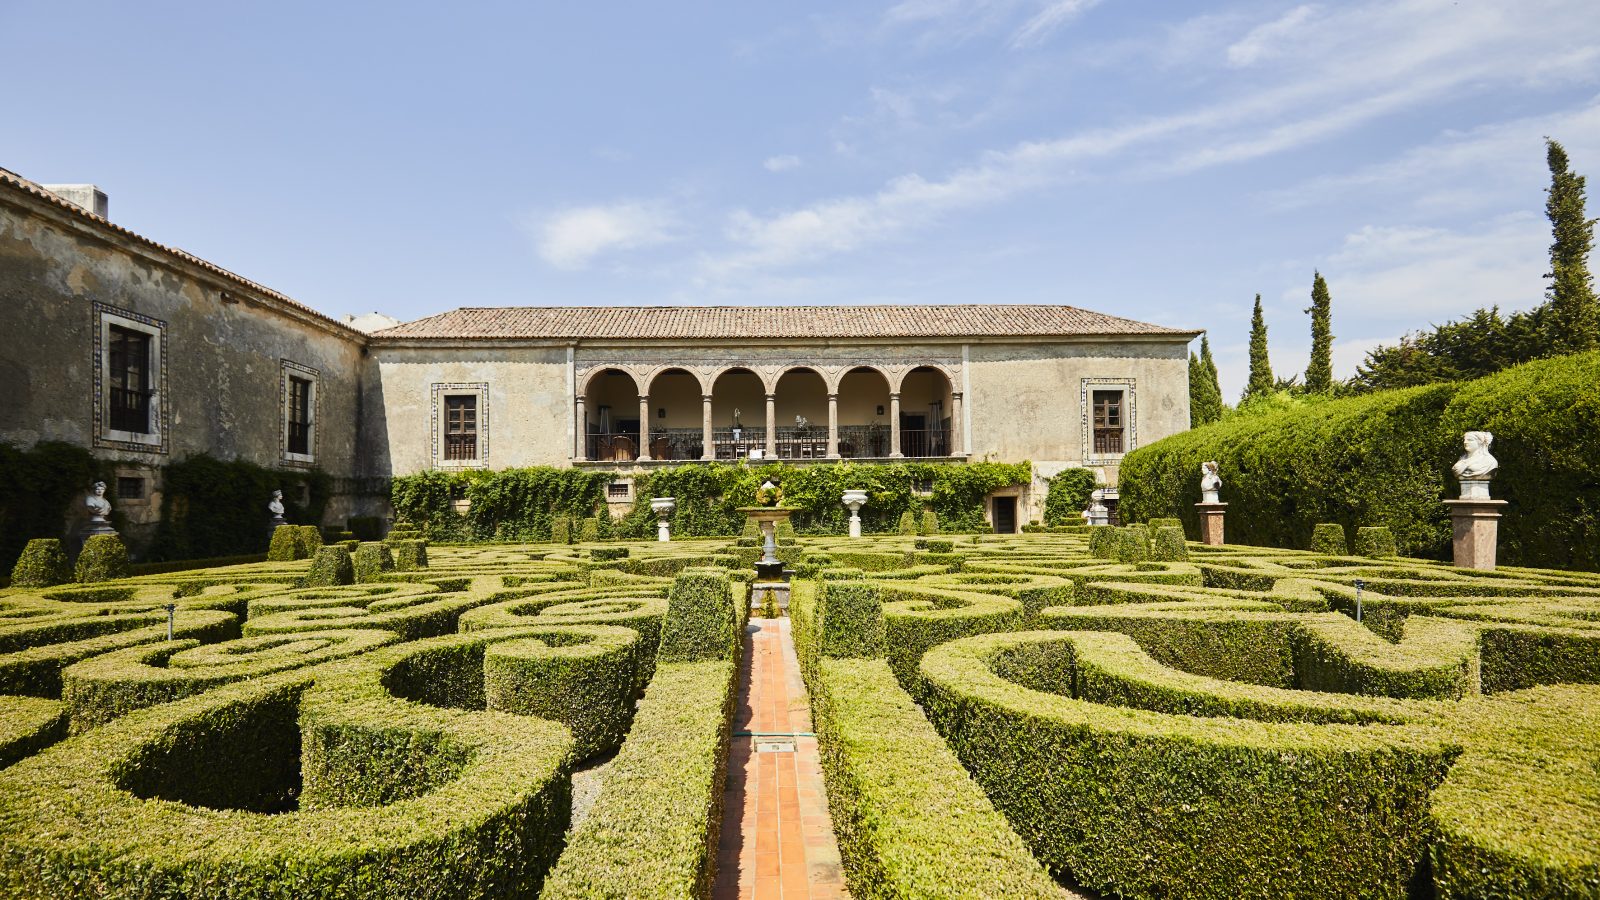 Hedge maze of an event venue in Portugal